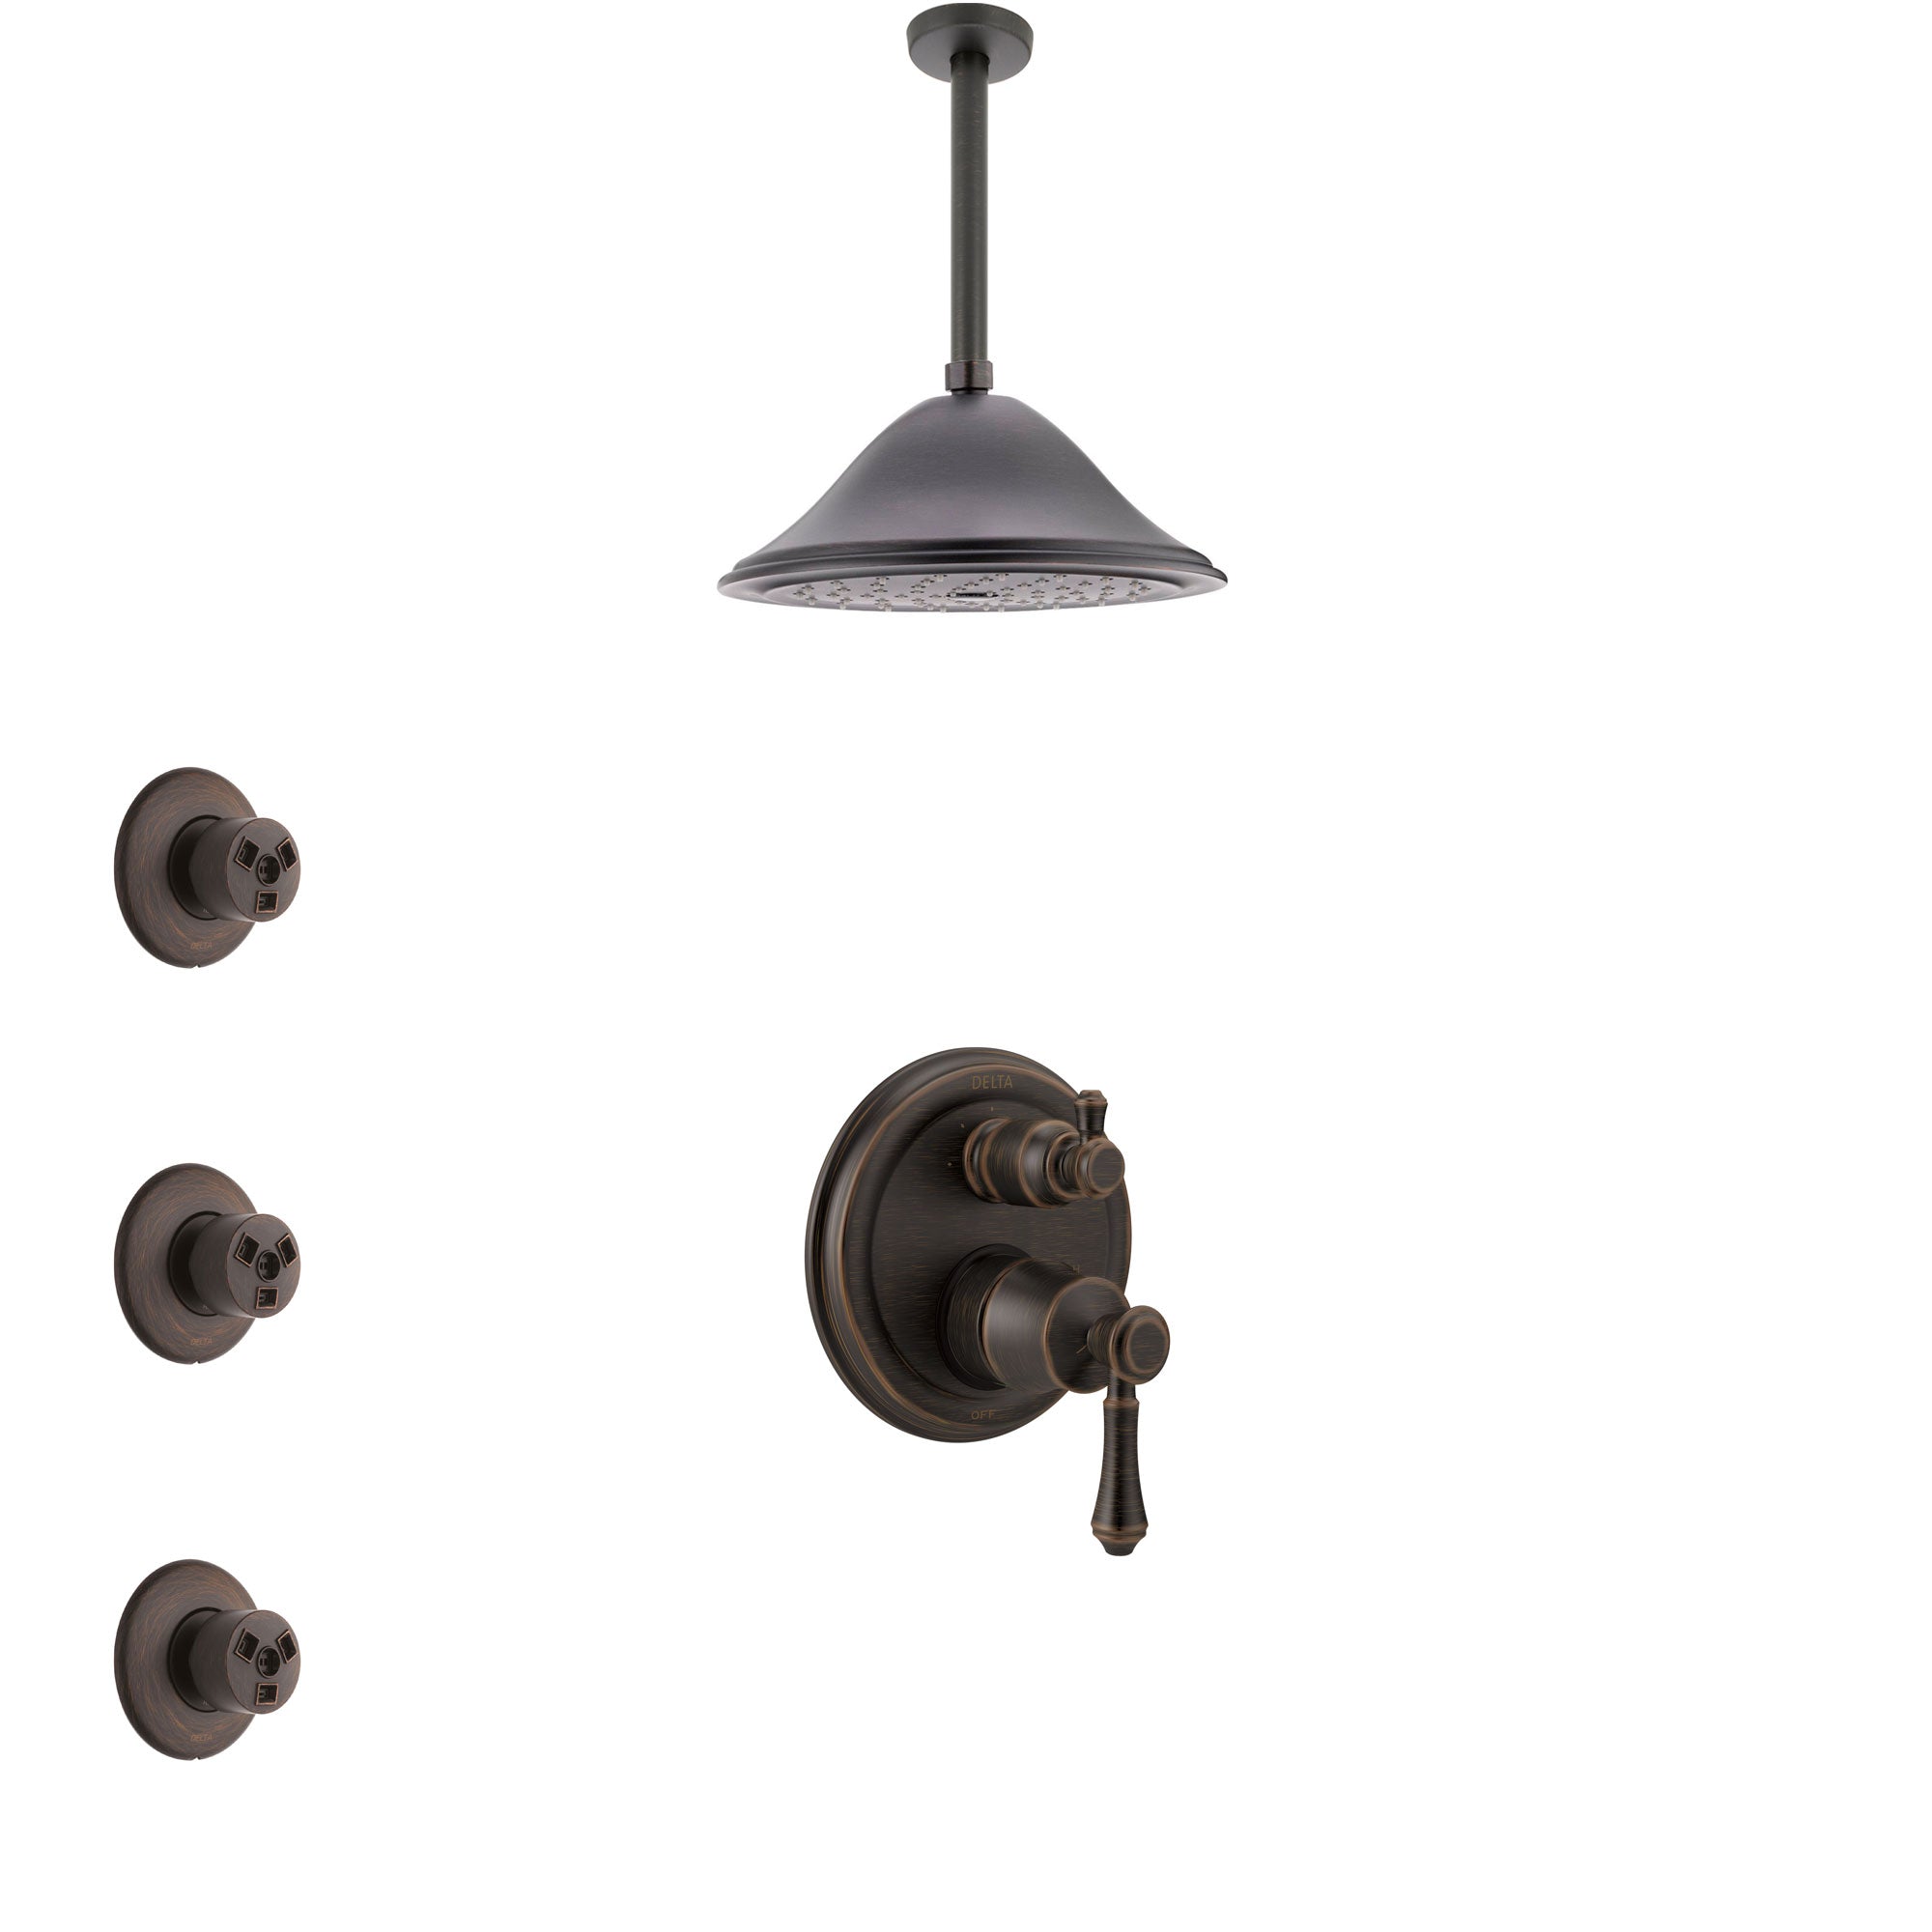 Delta Cassidy Venetian Bronze Shower System with Control Handle, Integrated 3-Setting Diverter, Ceiling Mount Showerhead, and 3 Body Sprays SS24897RB9